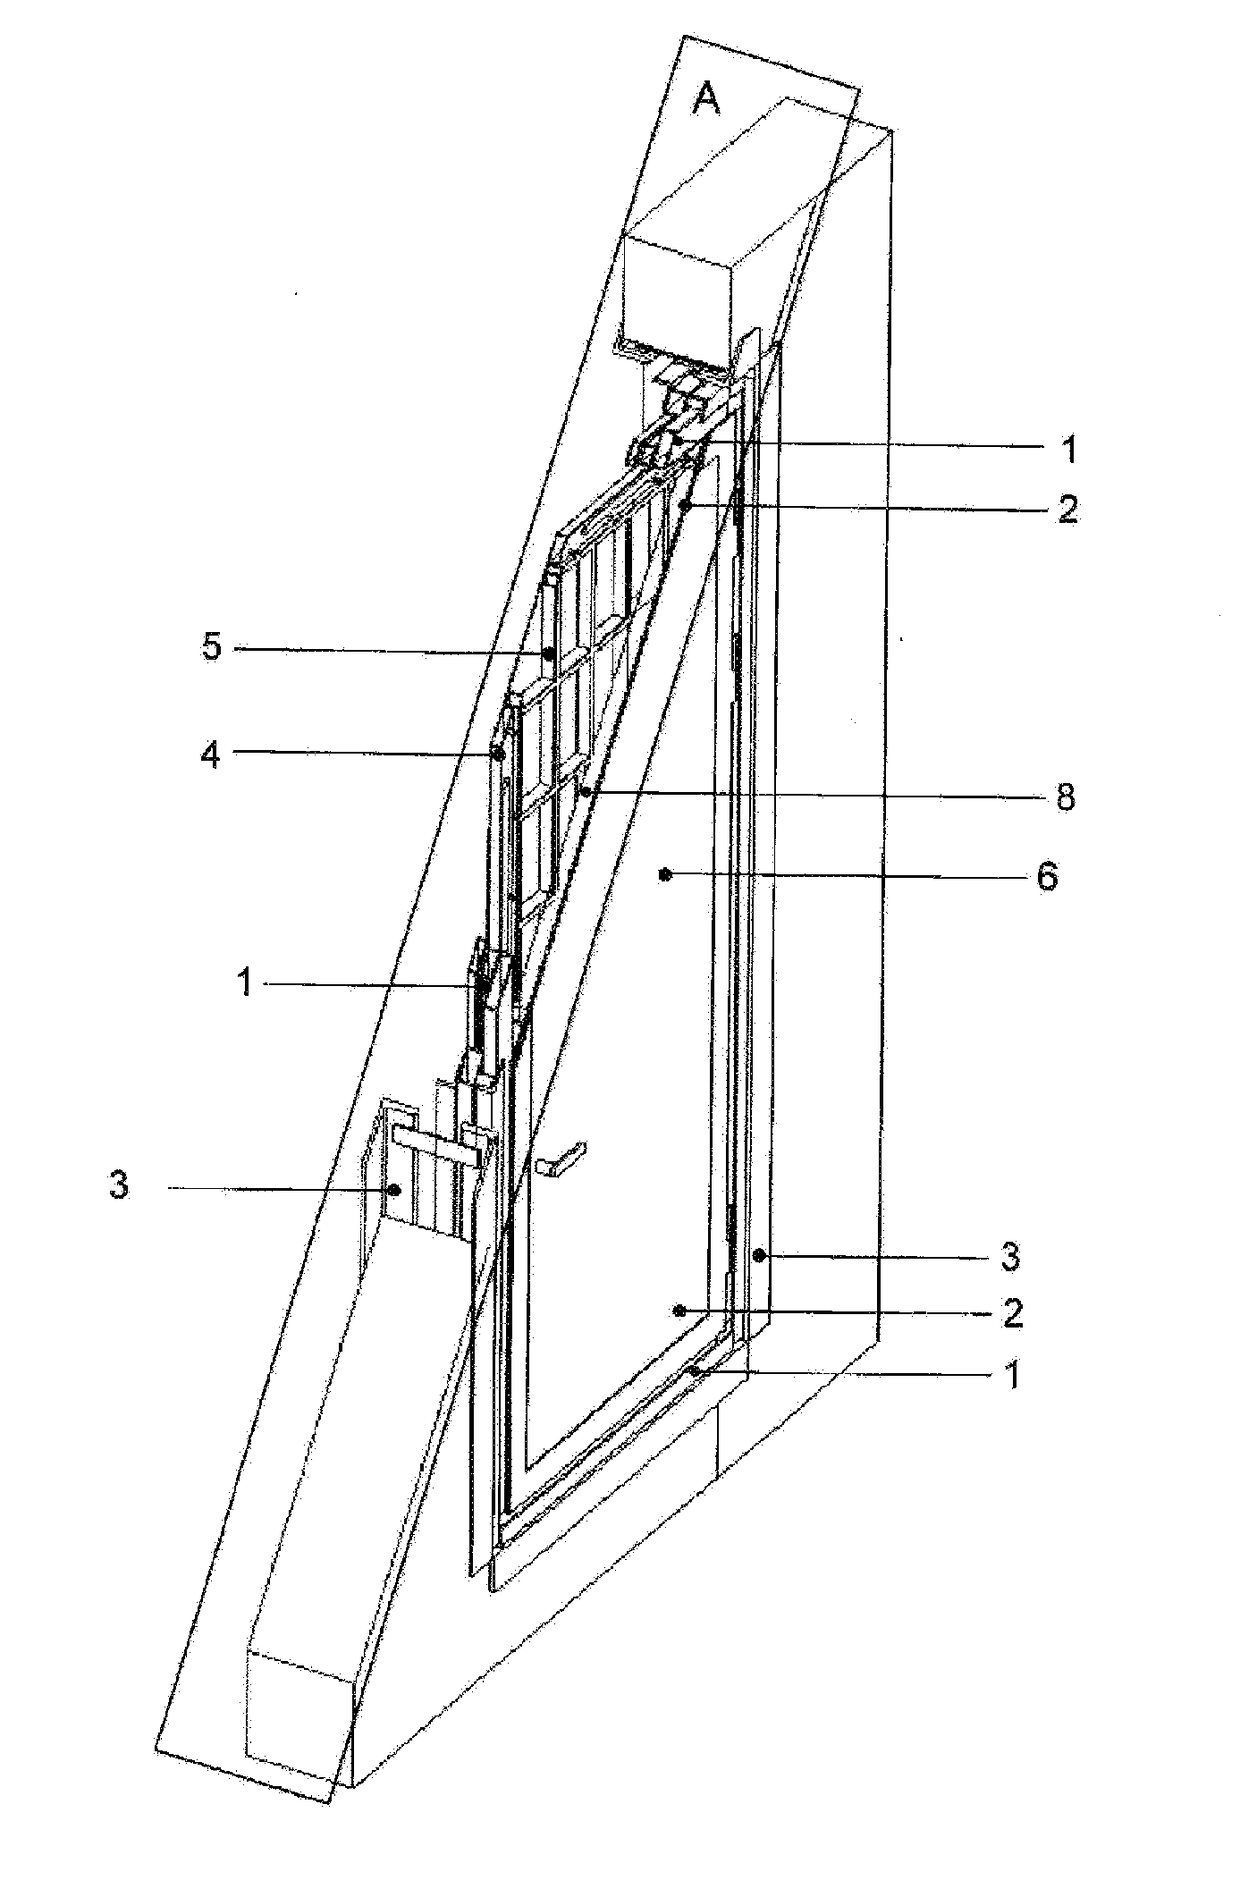 Fire-blast resistant door assembly and methods for installing the same